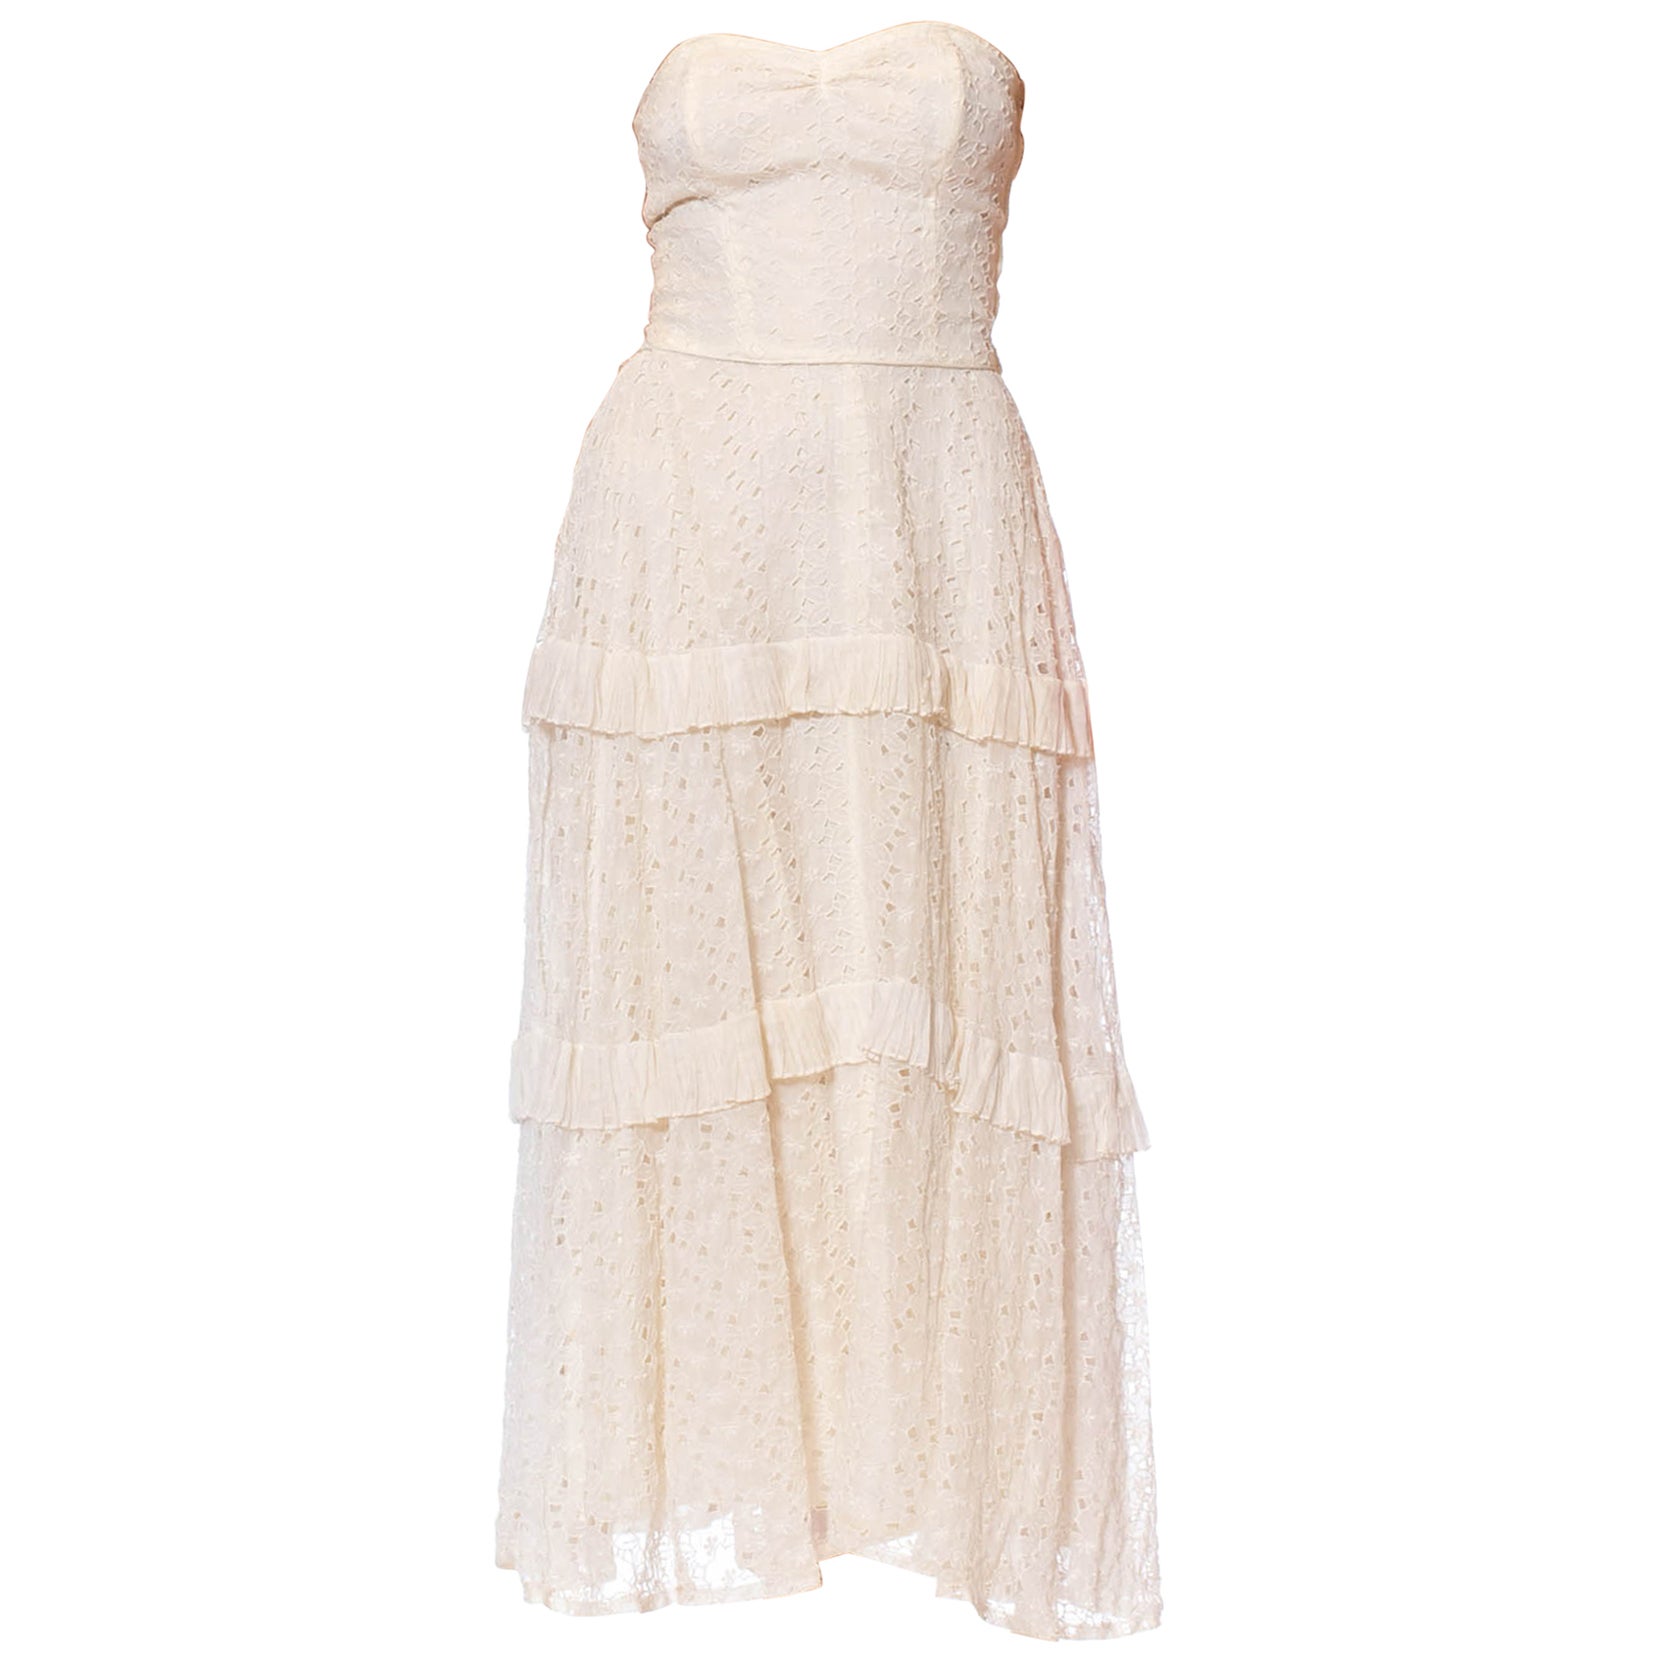 1960s - 1970s Floral Daisy Sheer Lace Dress at 1stDibs